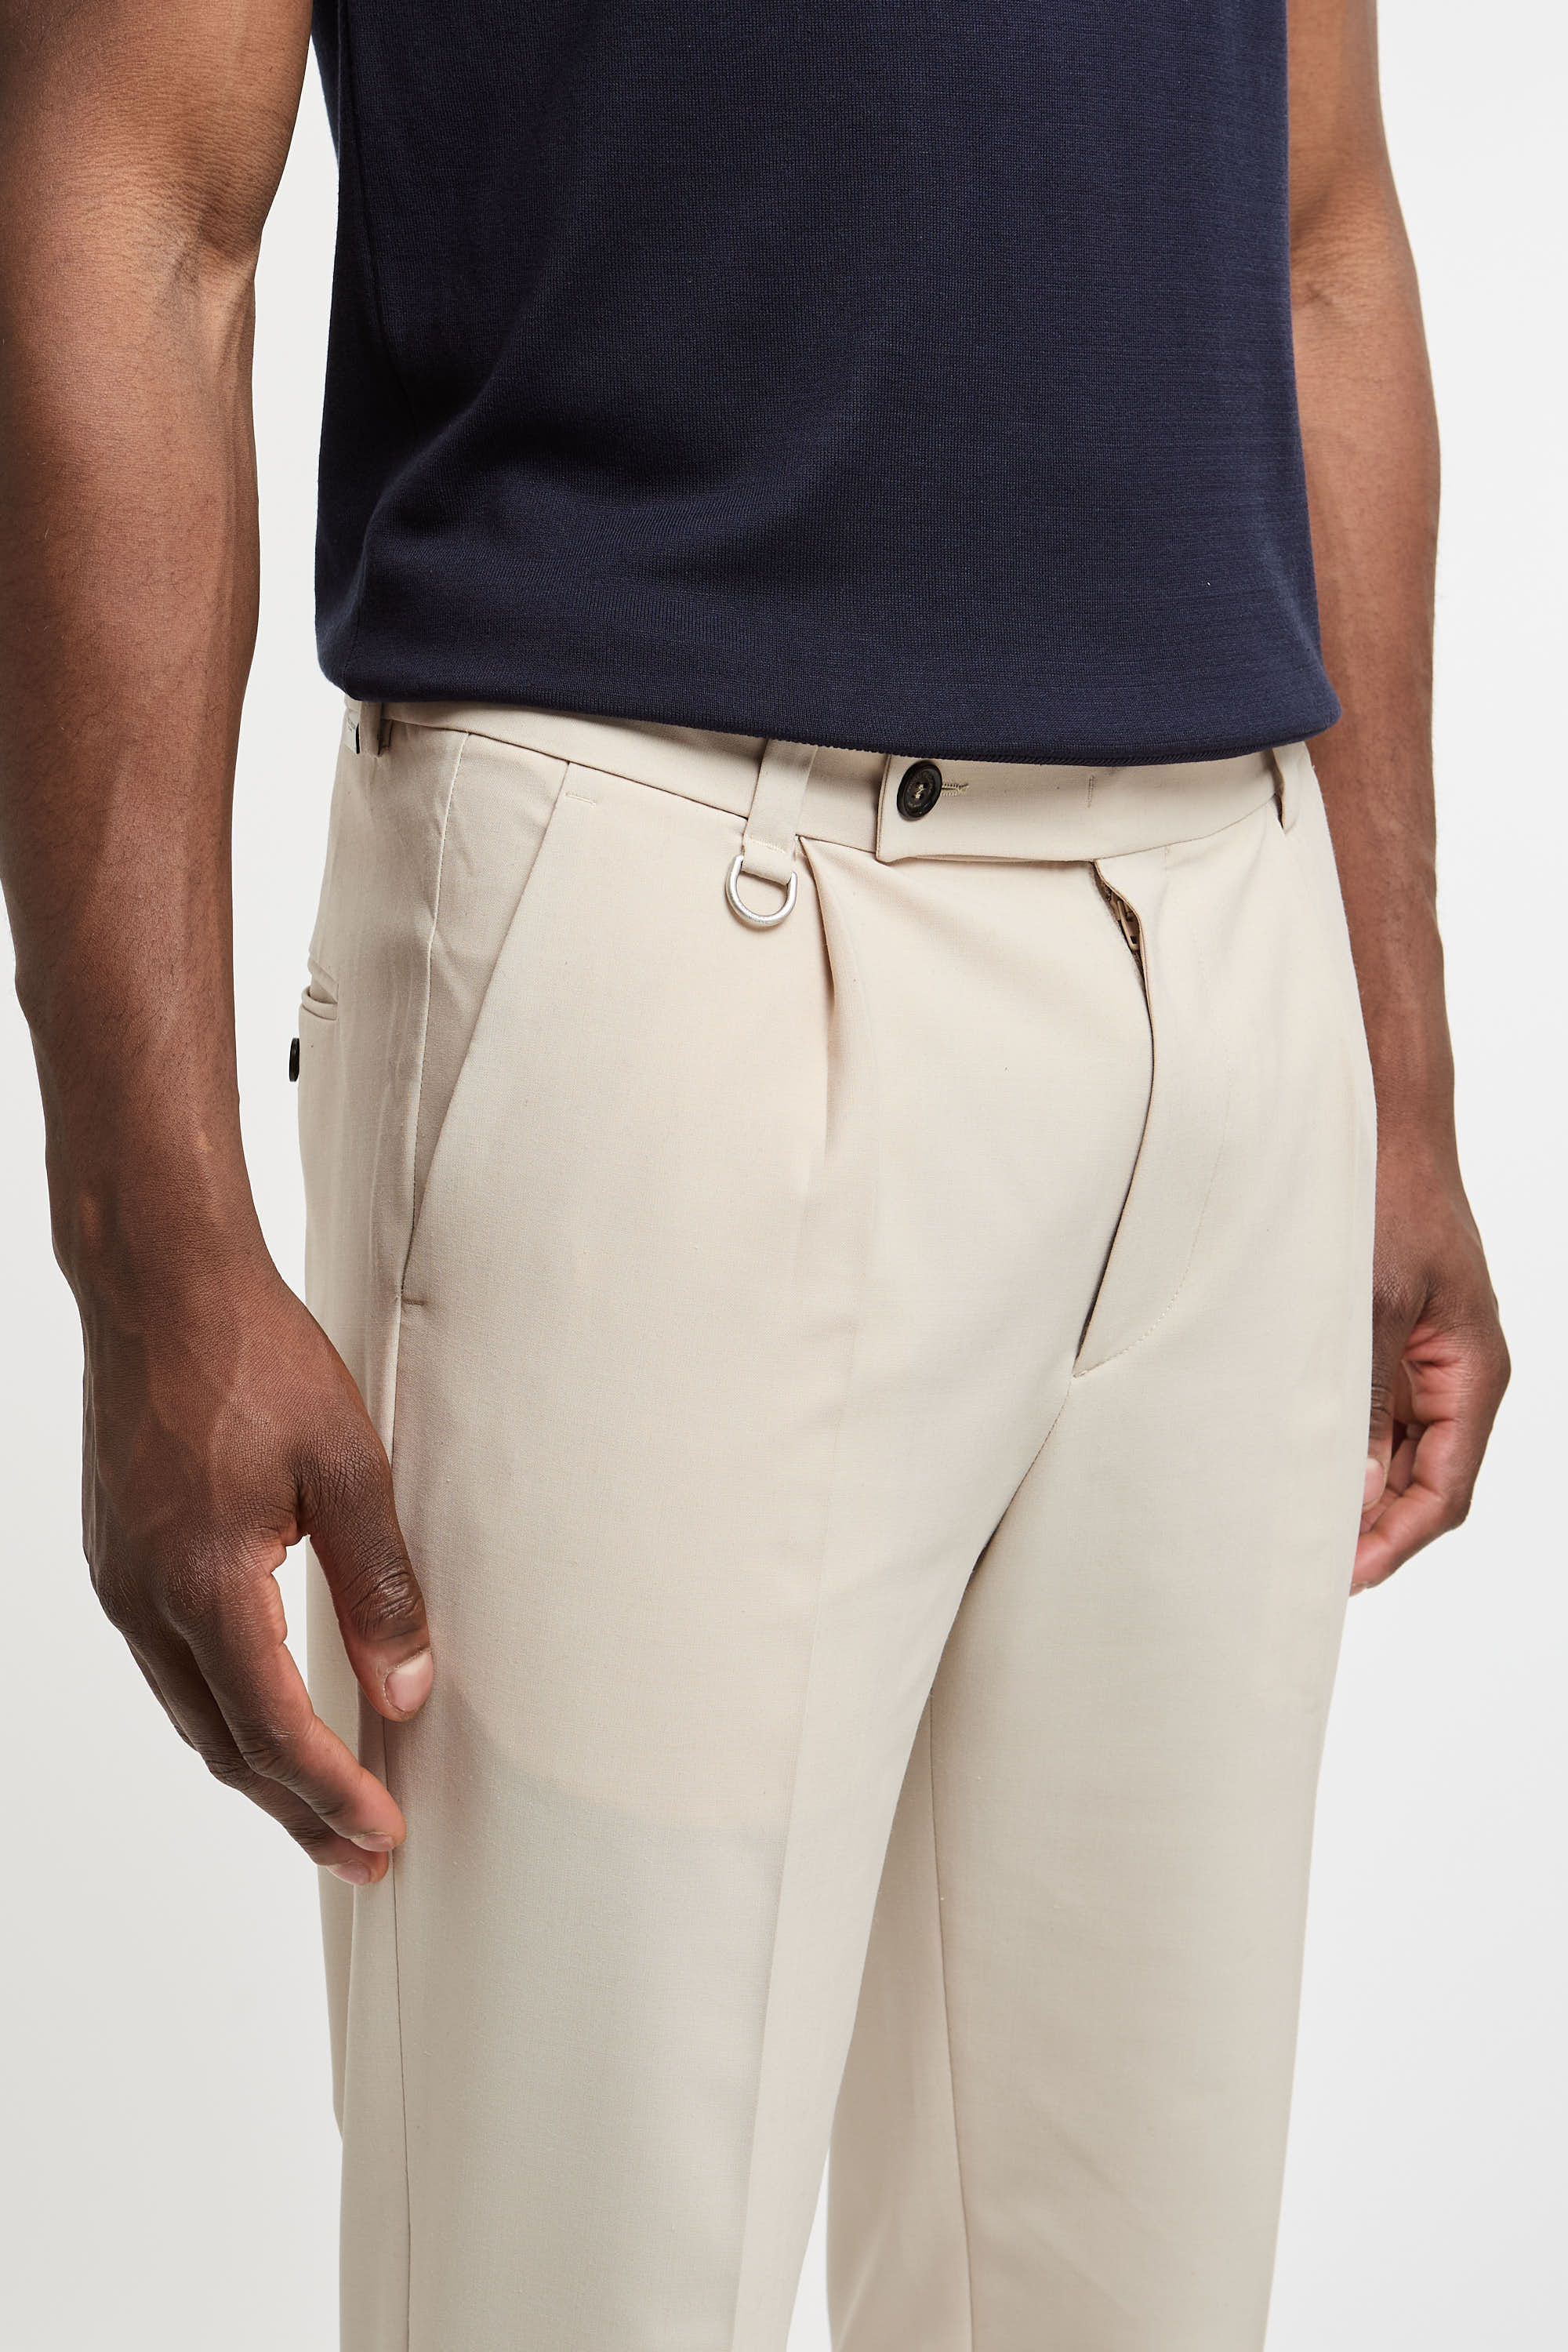 Paolo Pecora Beige Wool/Polyester Mix Trousers-6